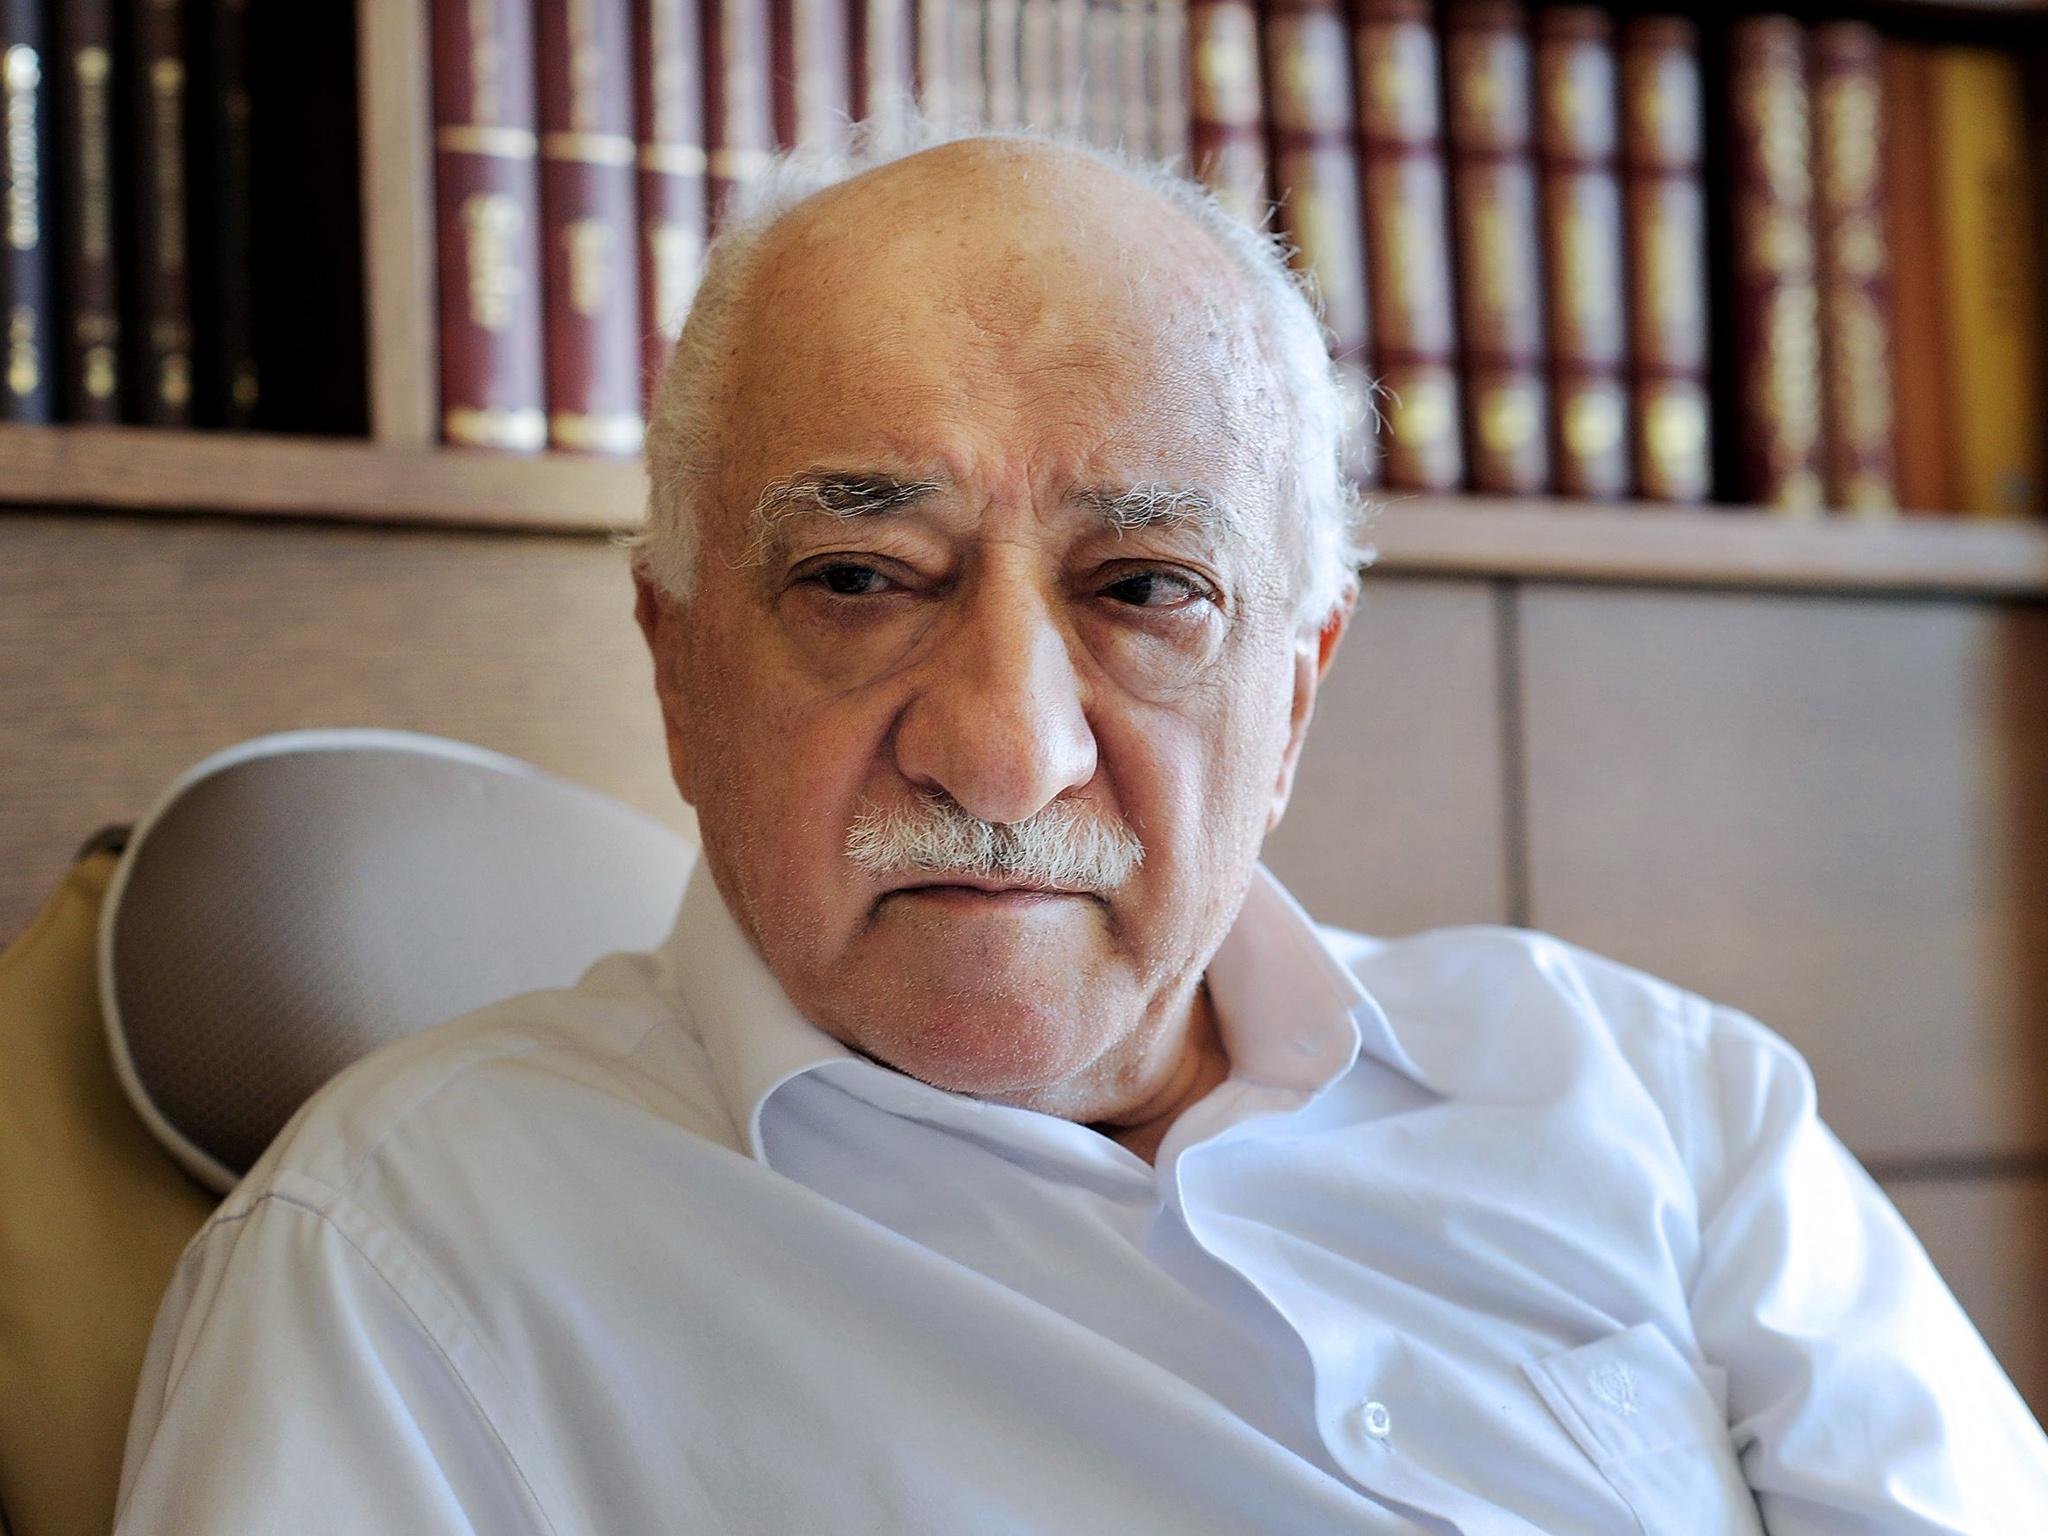 Fethullah Gulen, who lives in the US, has denied responsibility for July's failed coup